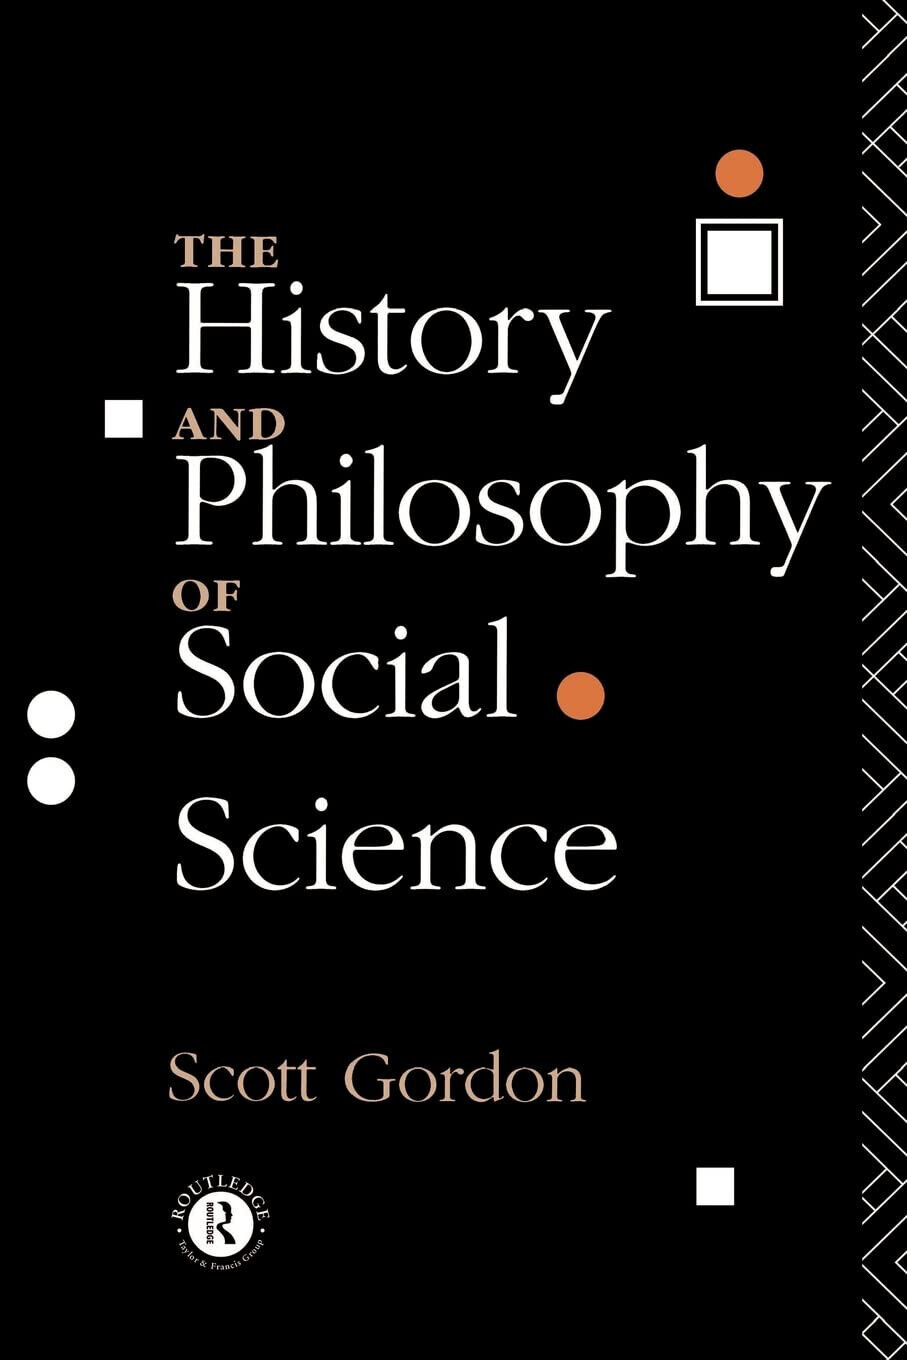 The History and Philosophy of Social Science - H. Scott Gordon - Routledge, 1993